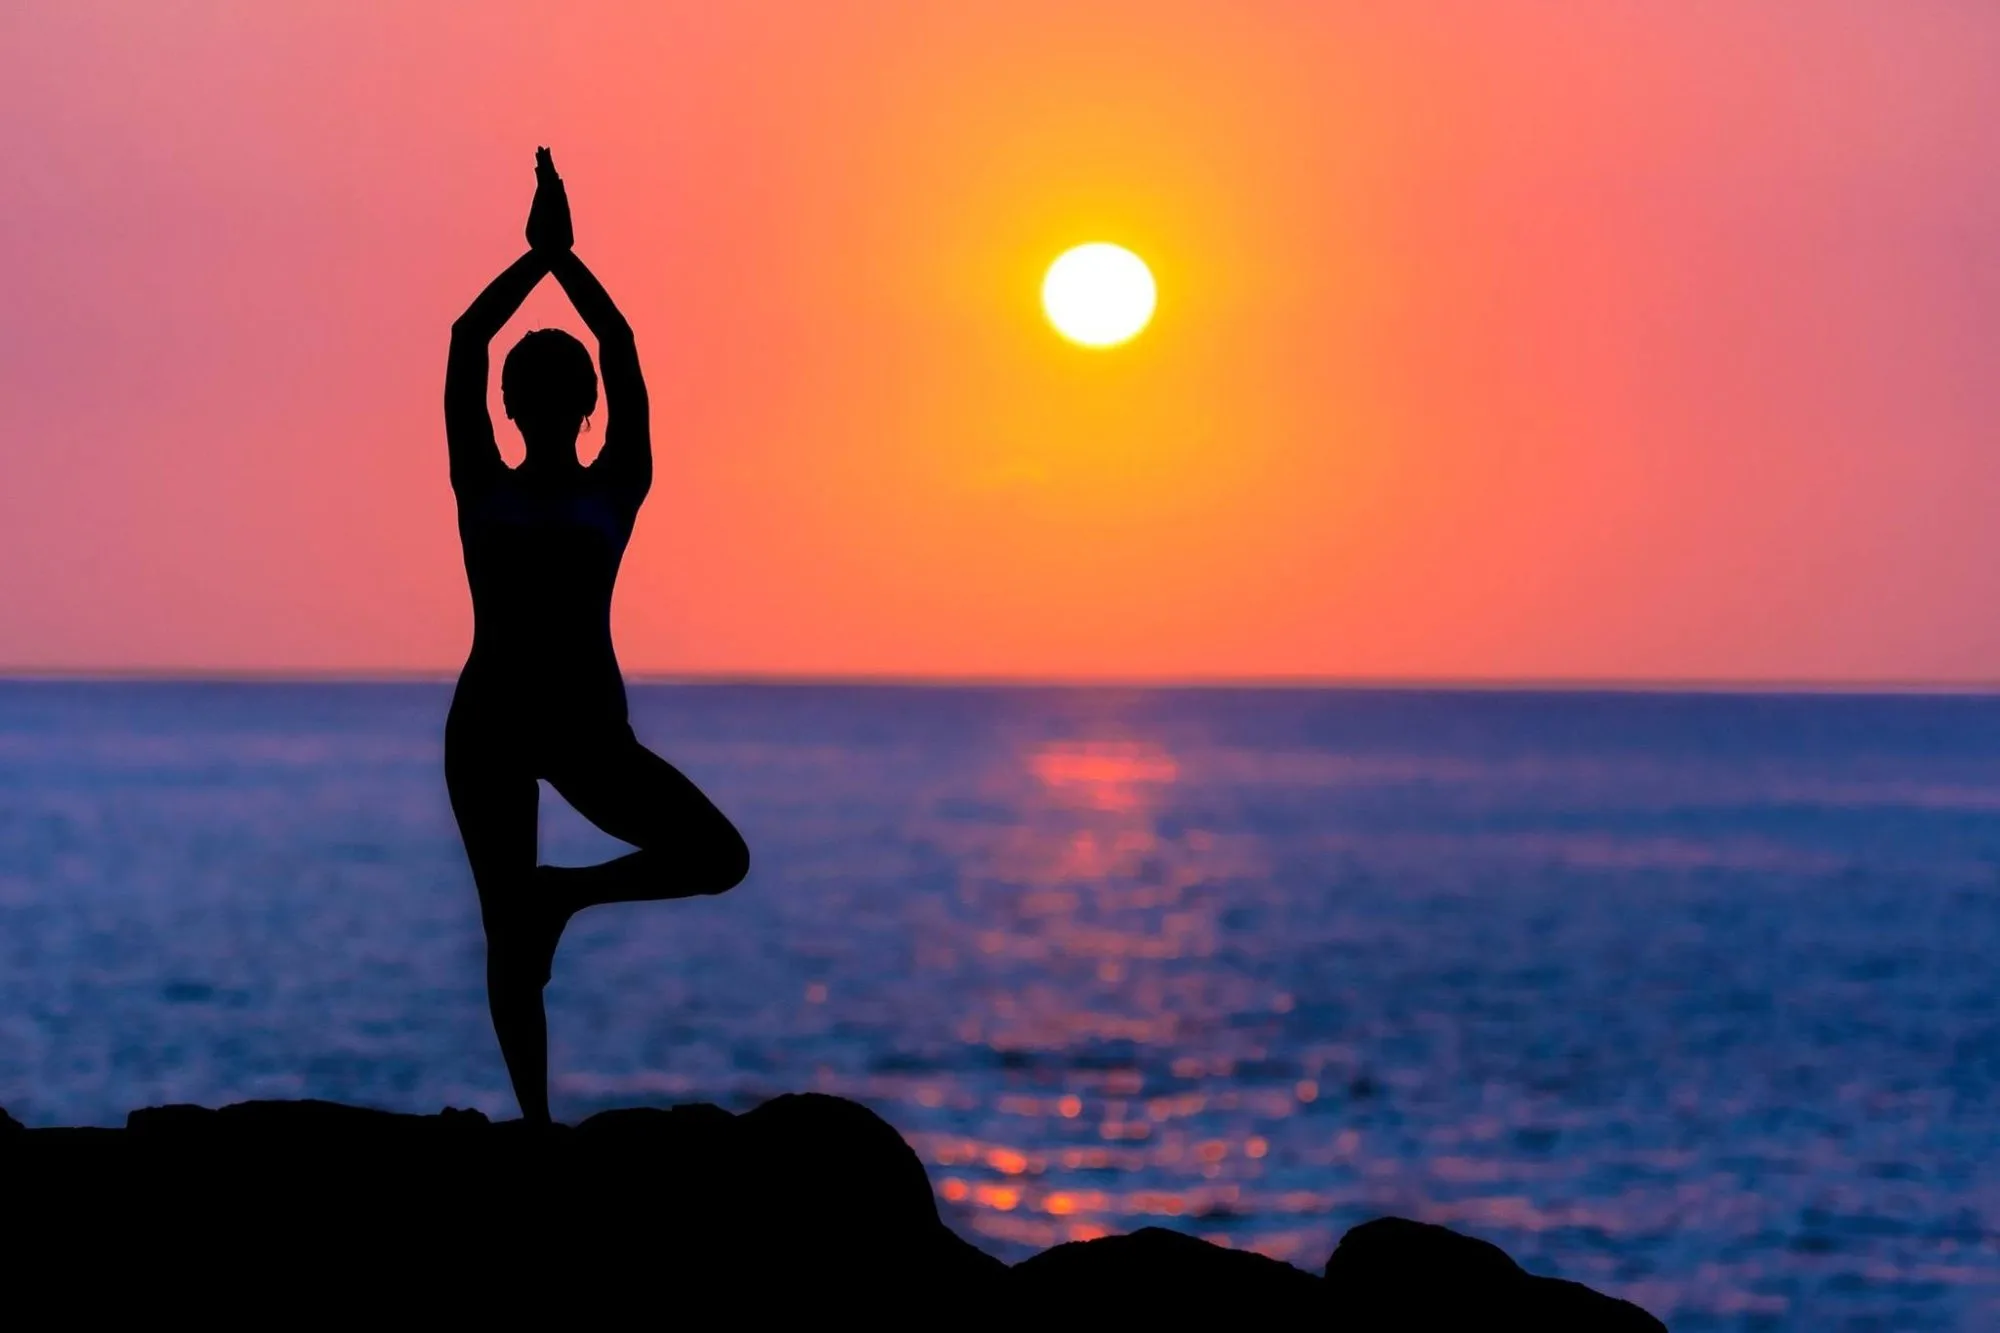 Corona Stress Can Be Reduced With Yogic Rituals